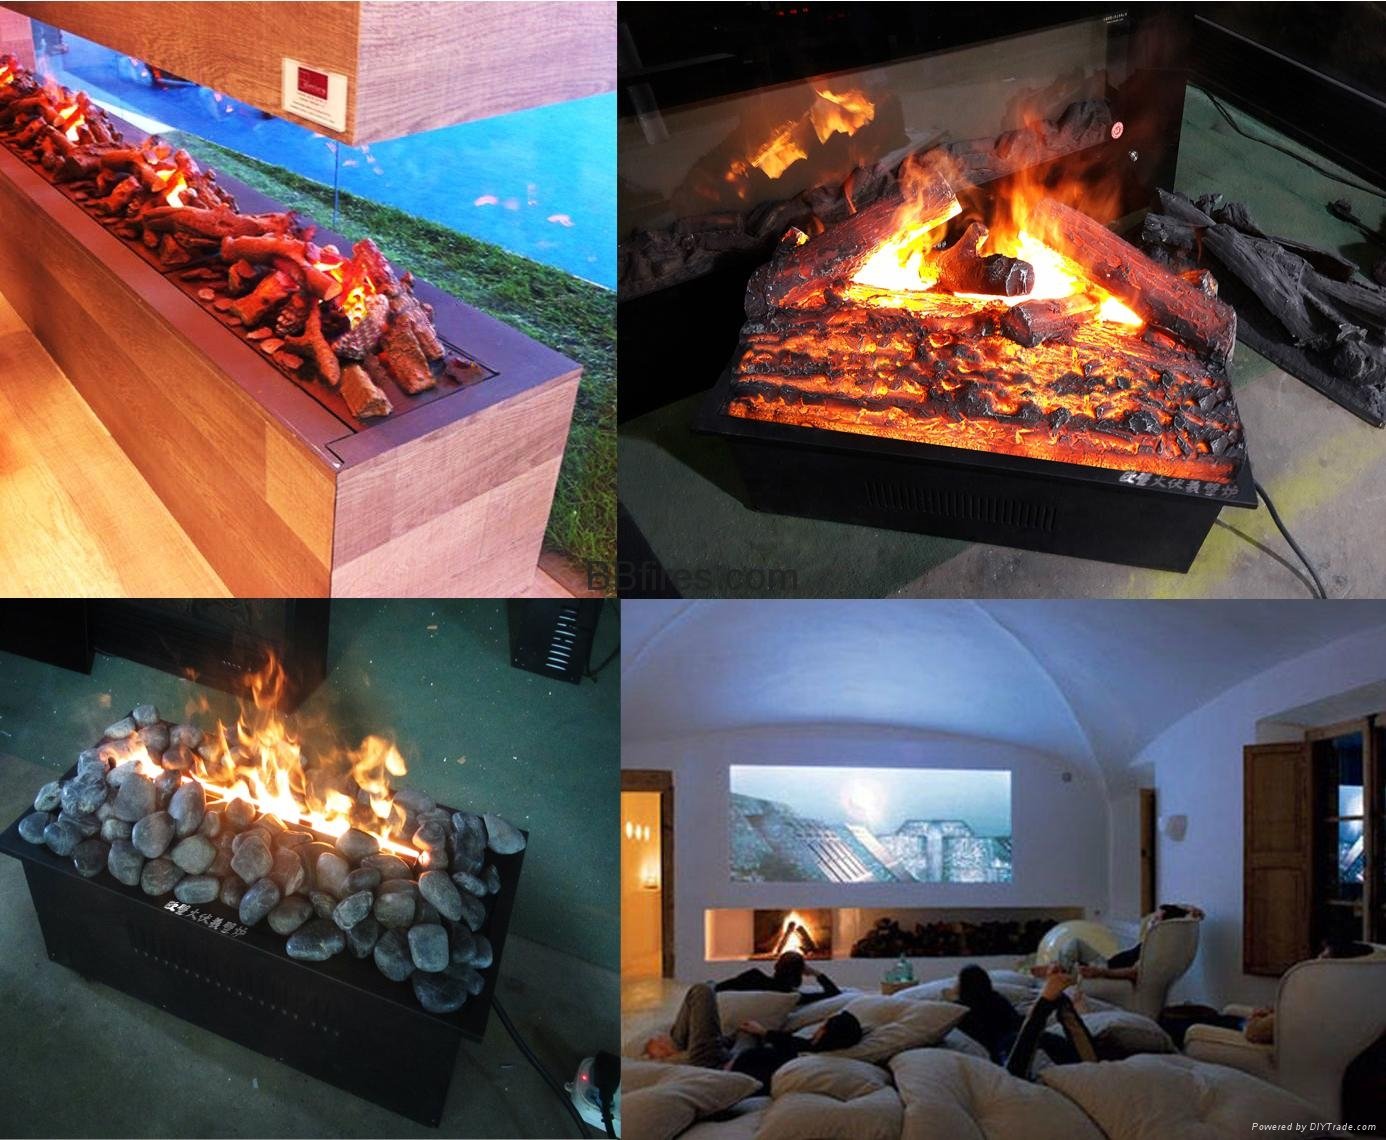 Some other 3 D electric Fireplace job references